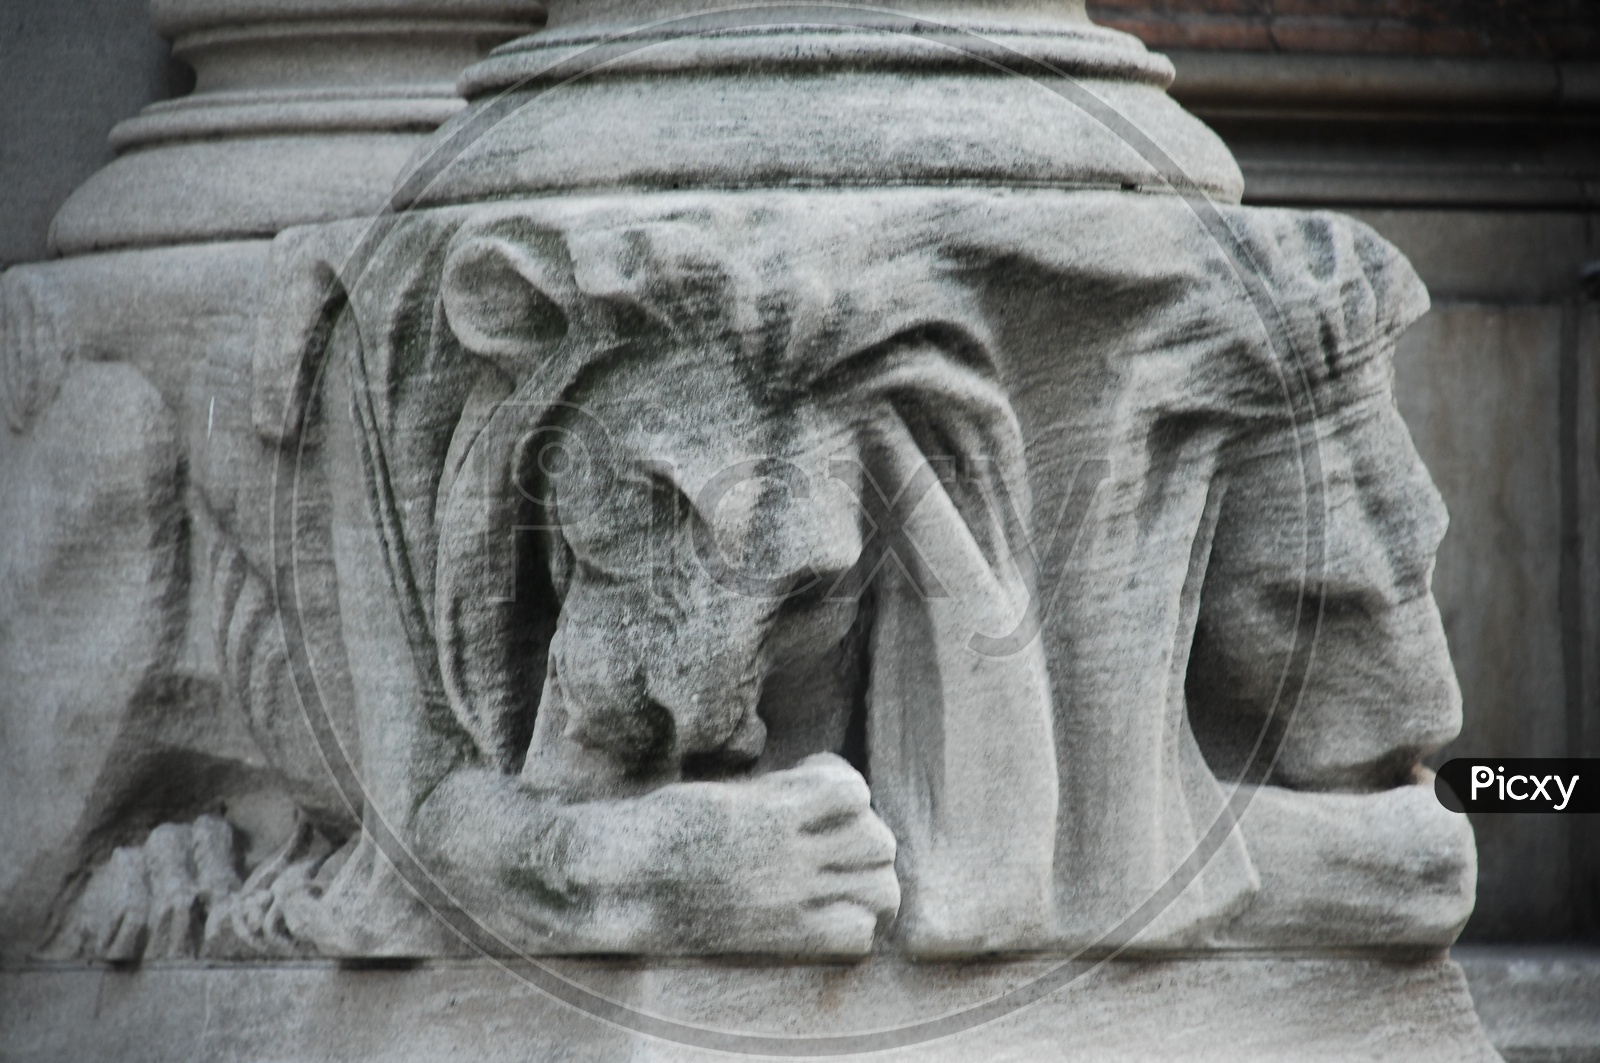 A stone carving of Lion's face